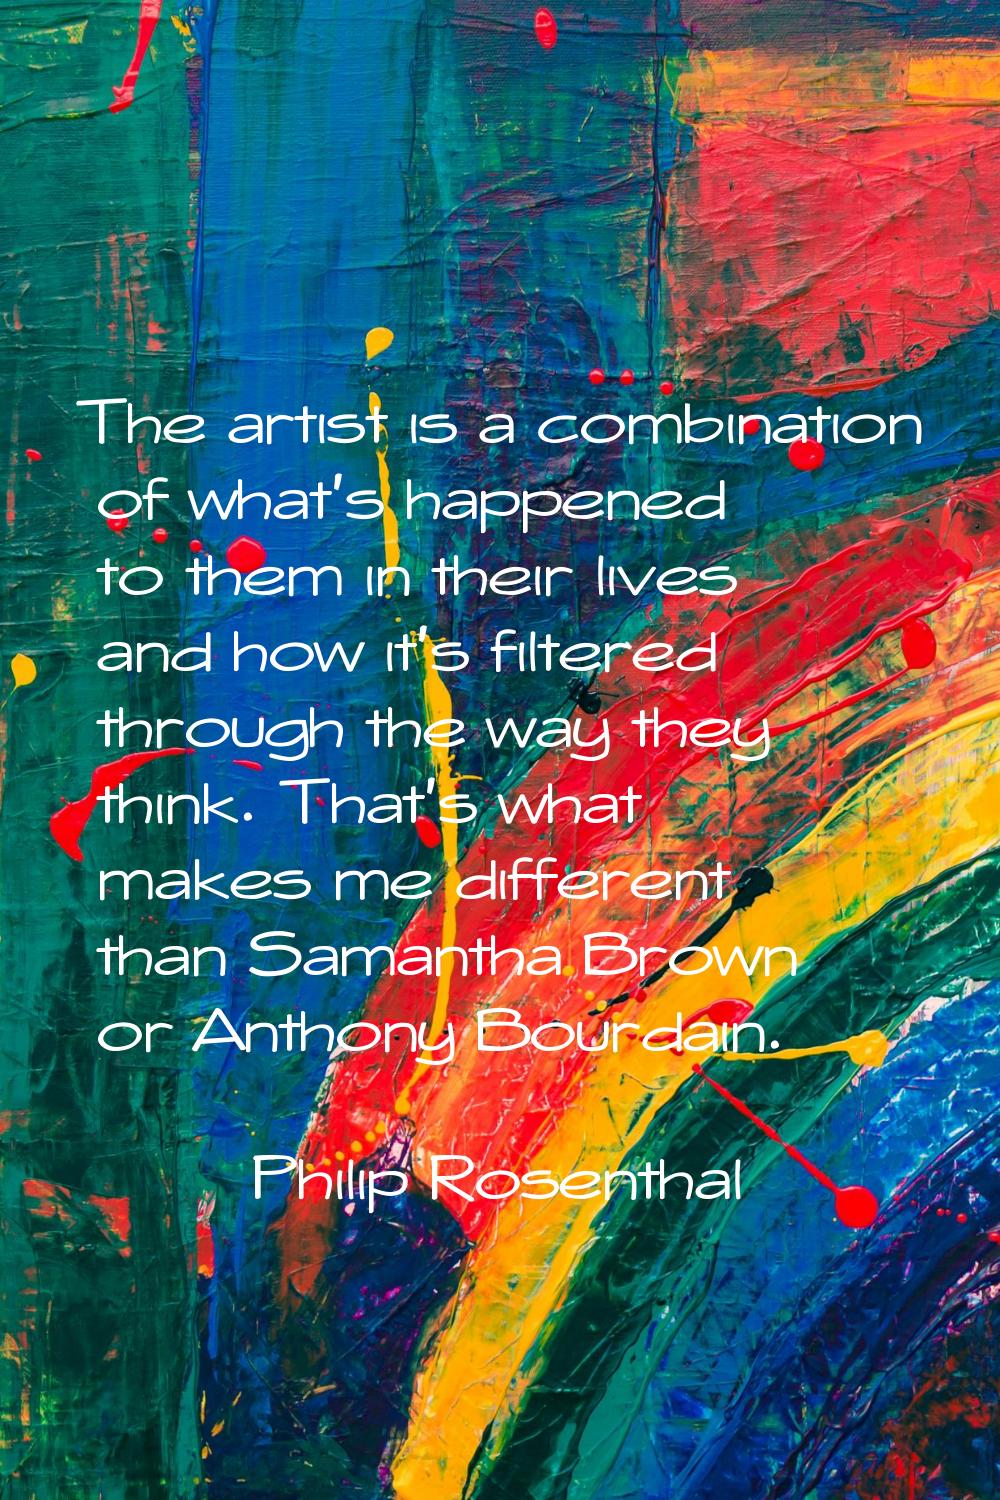 The artist is a combination of what's happened to them in their lives and how it's filtered through